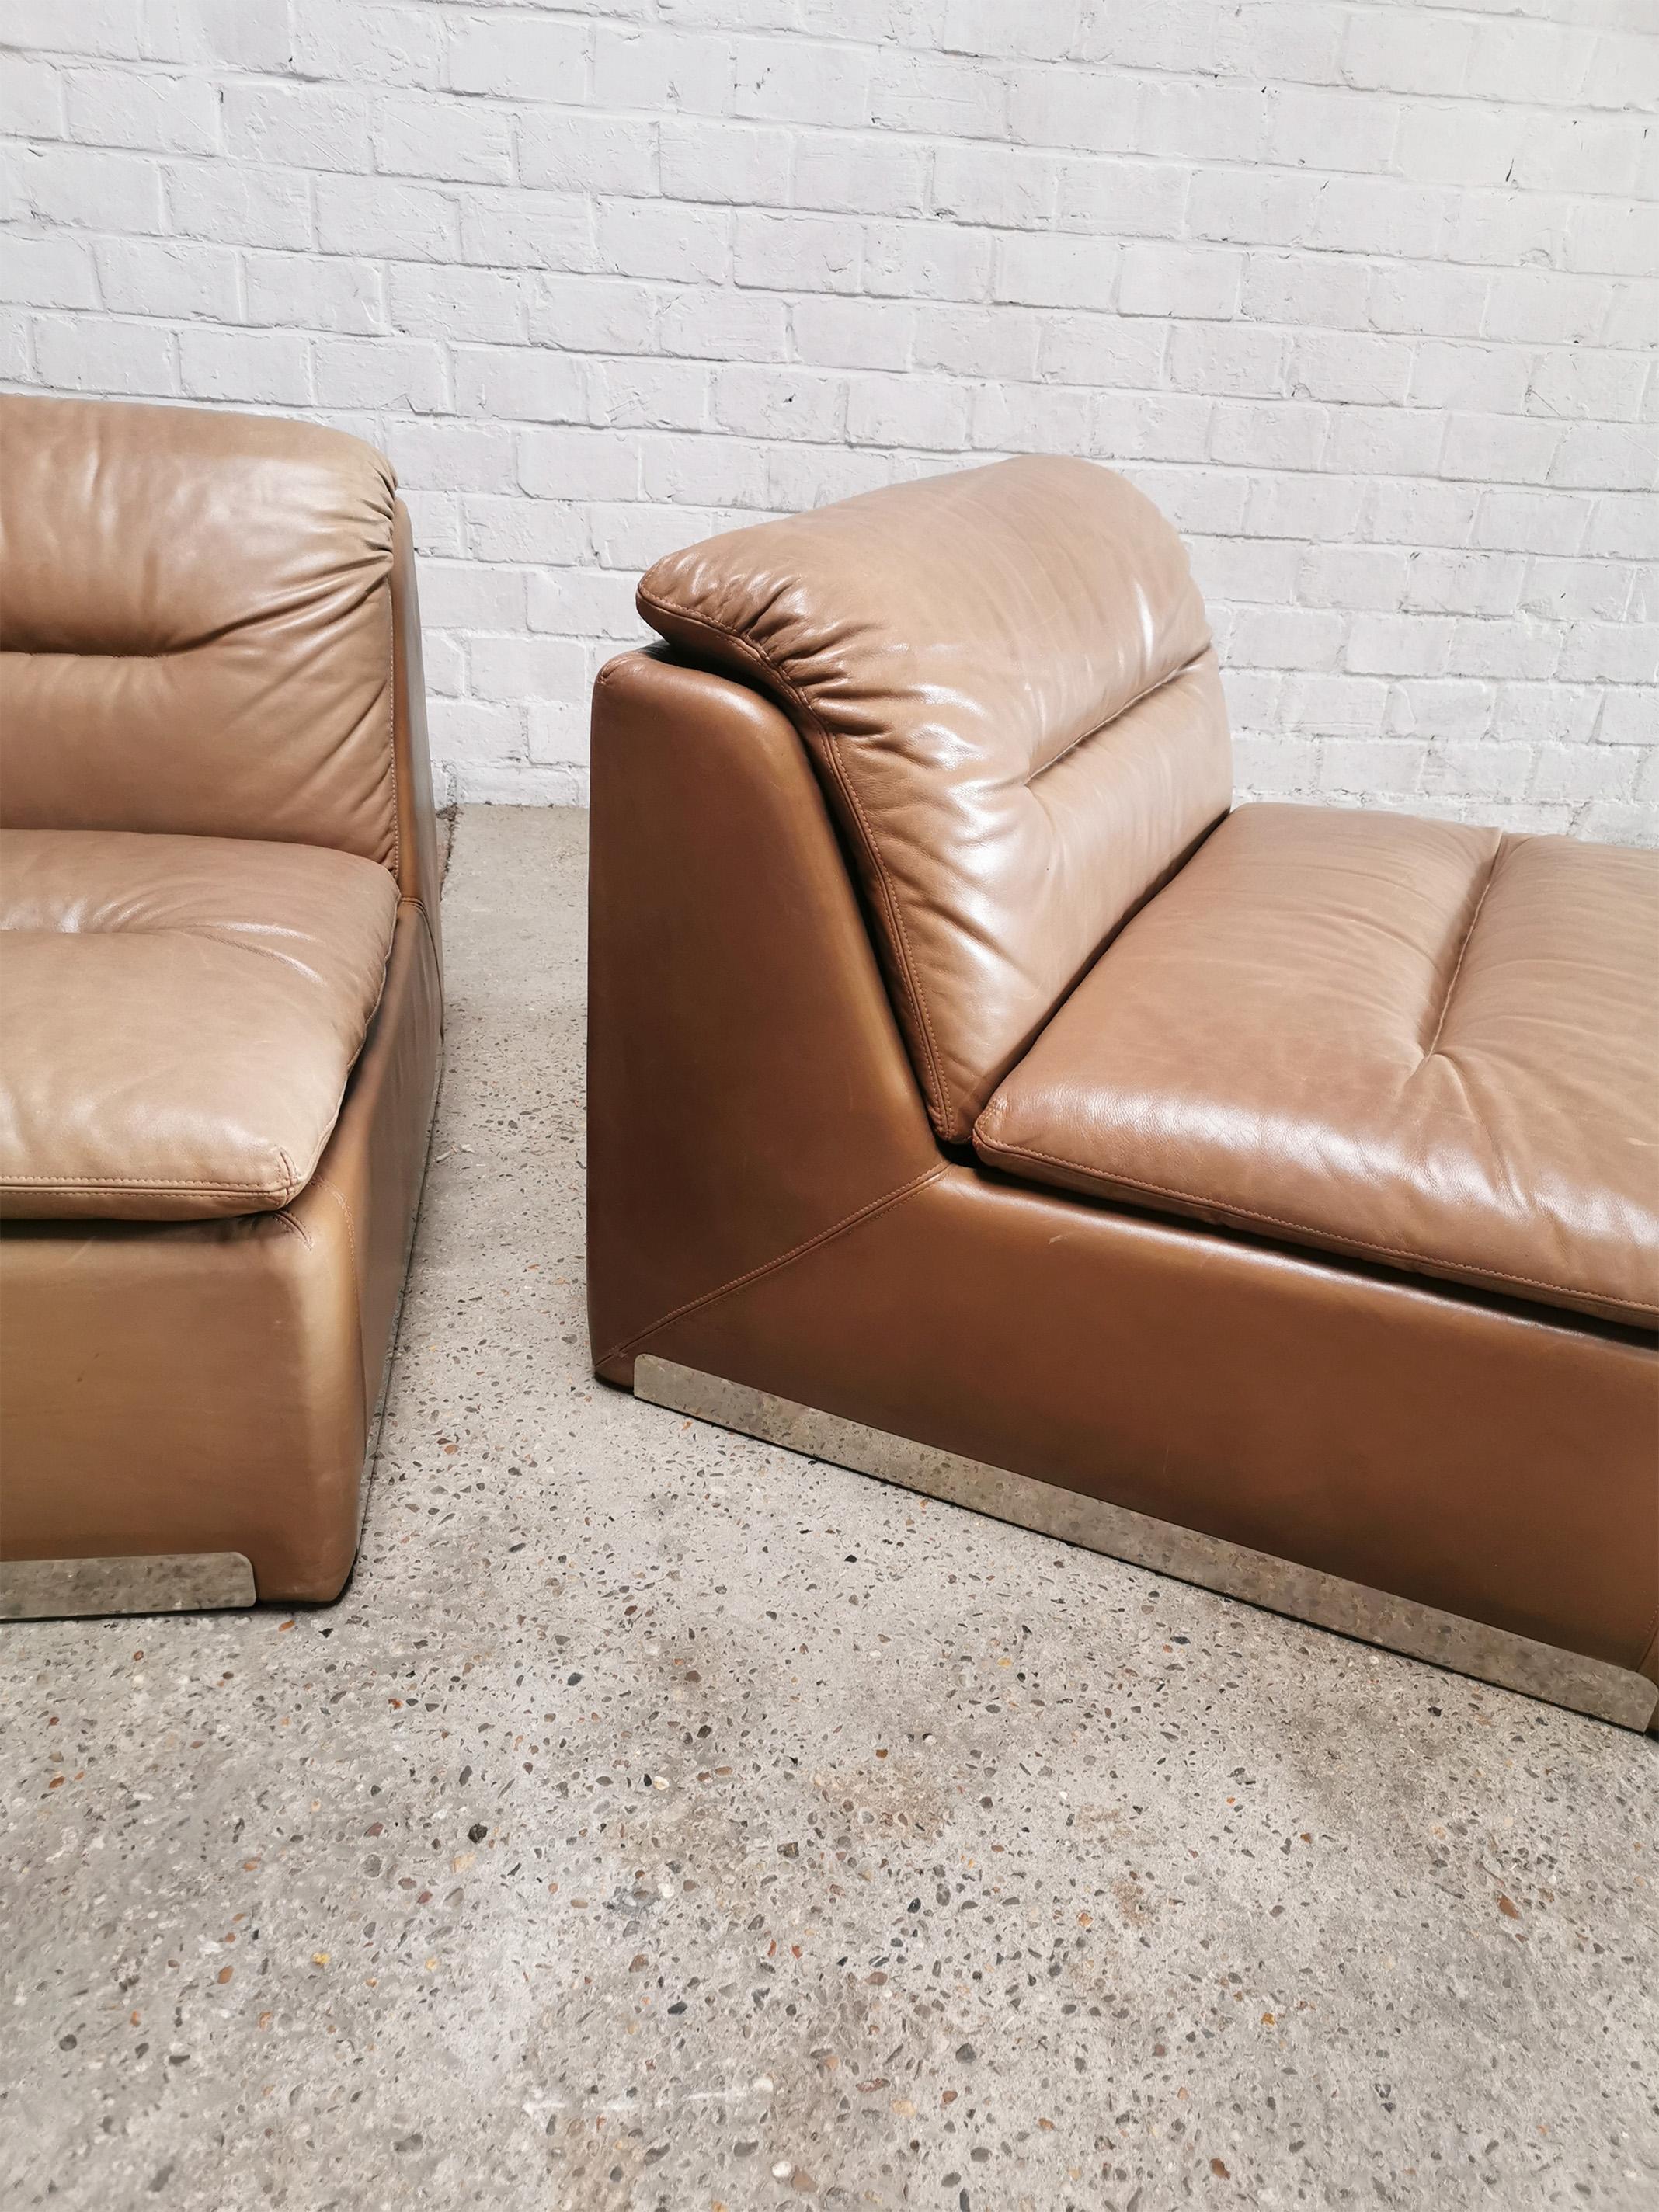 Italian Saporiti Cognac Leather 'P10' Lounge Chairs, Italy 1970's For Sale